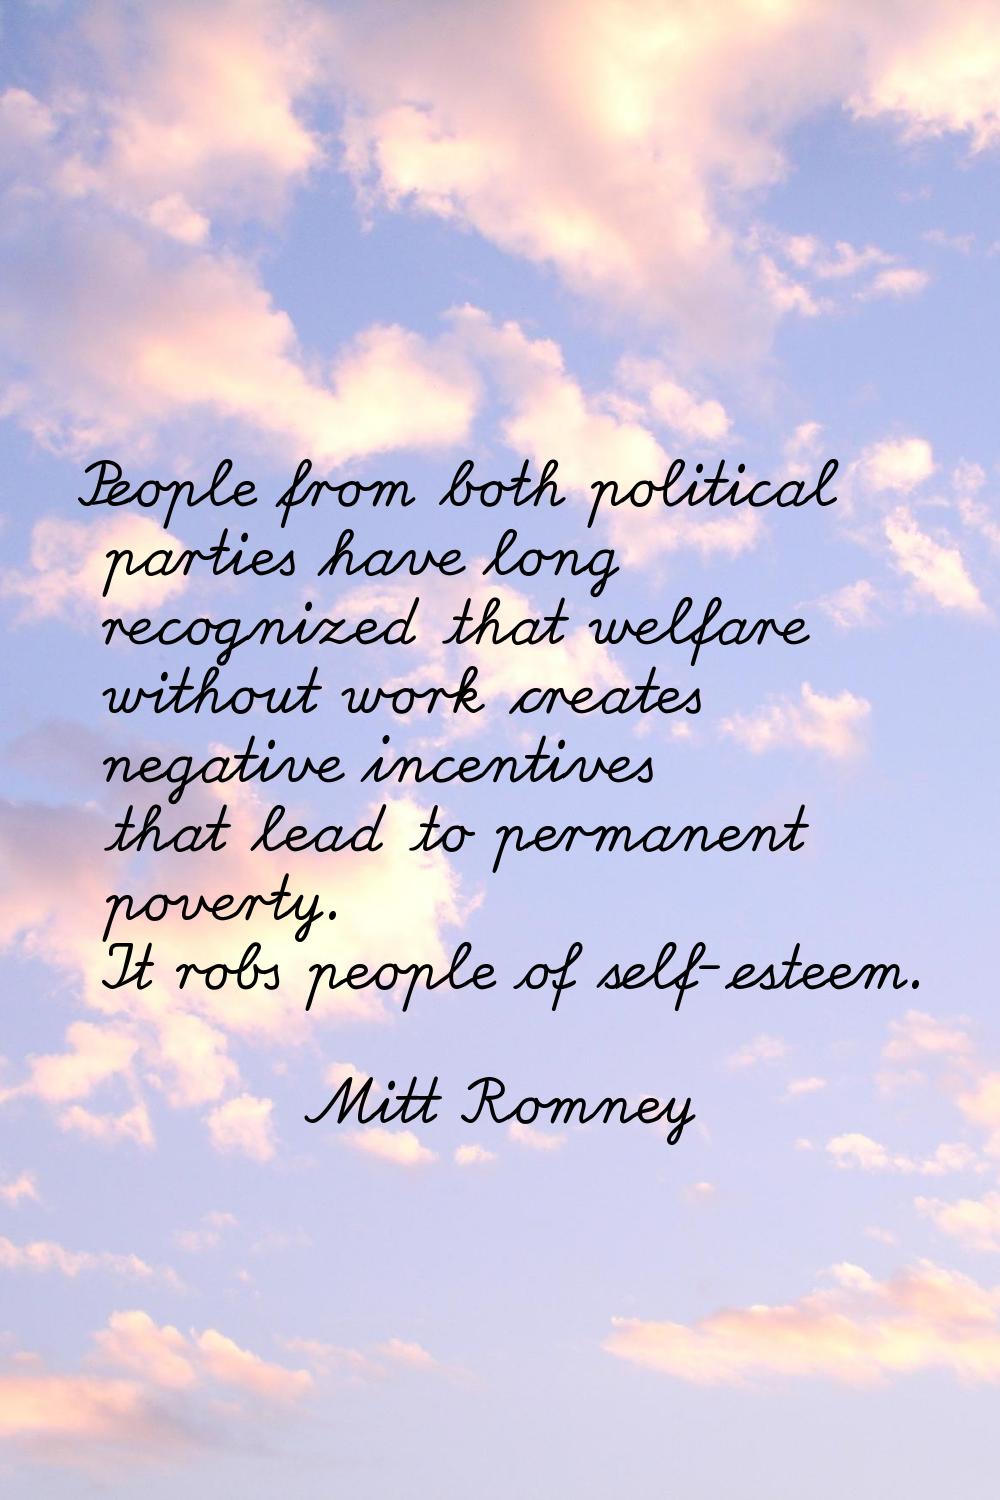 People from both political parties have long recognized that welfare without work creates negative 